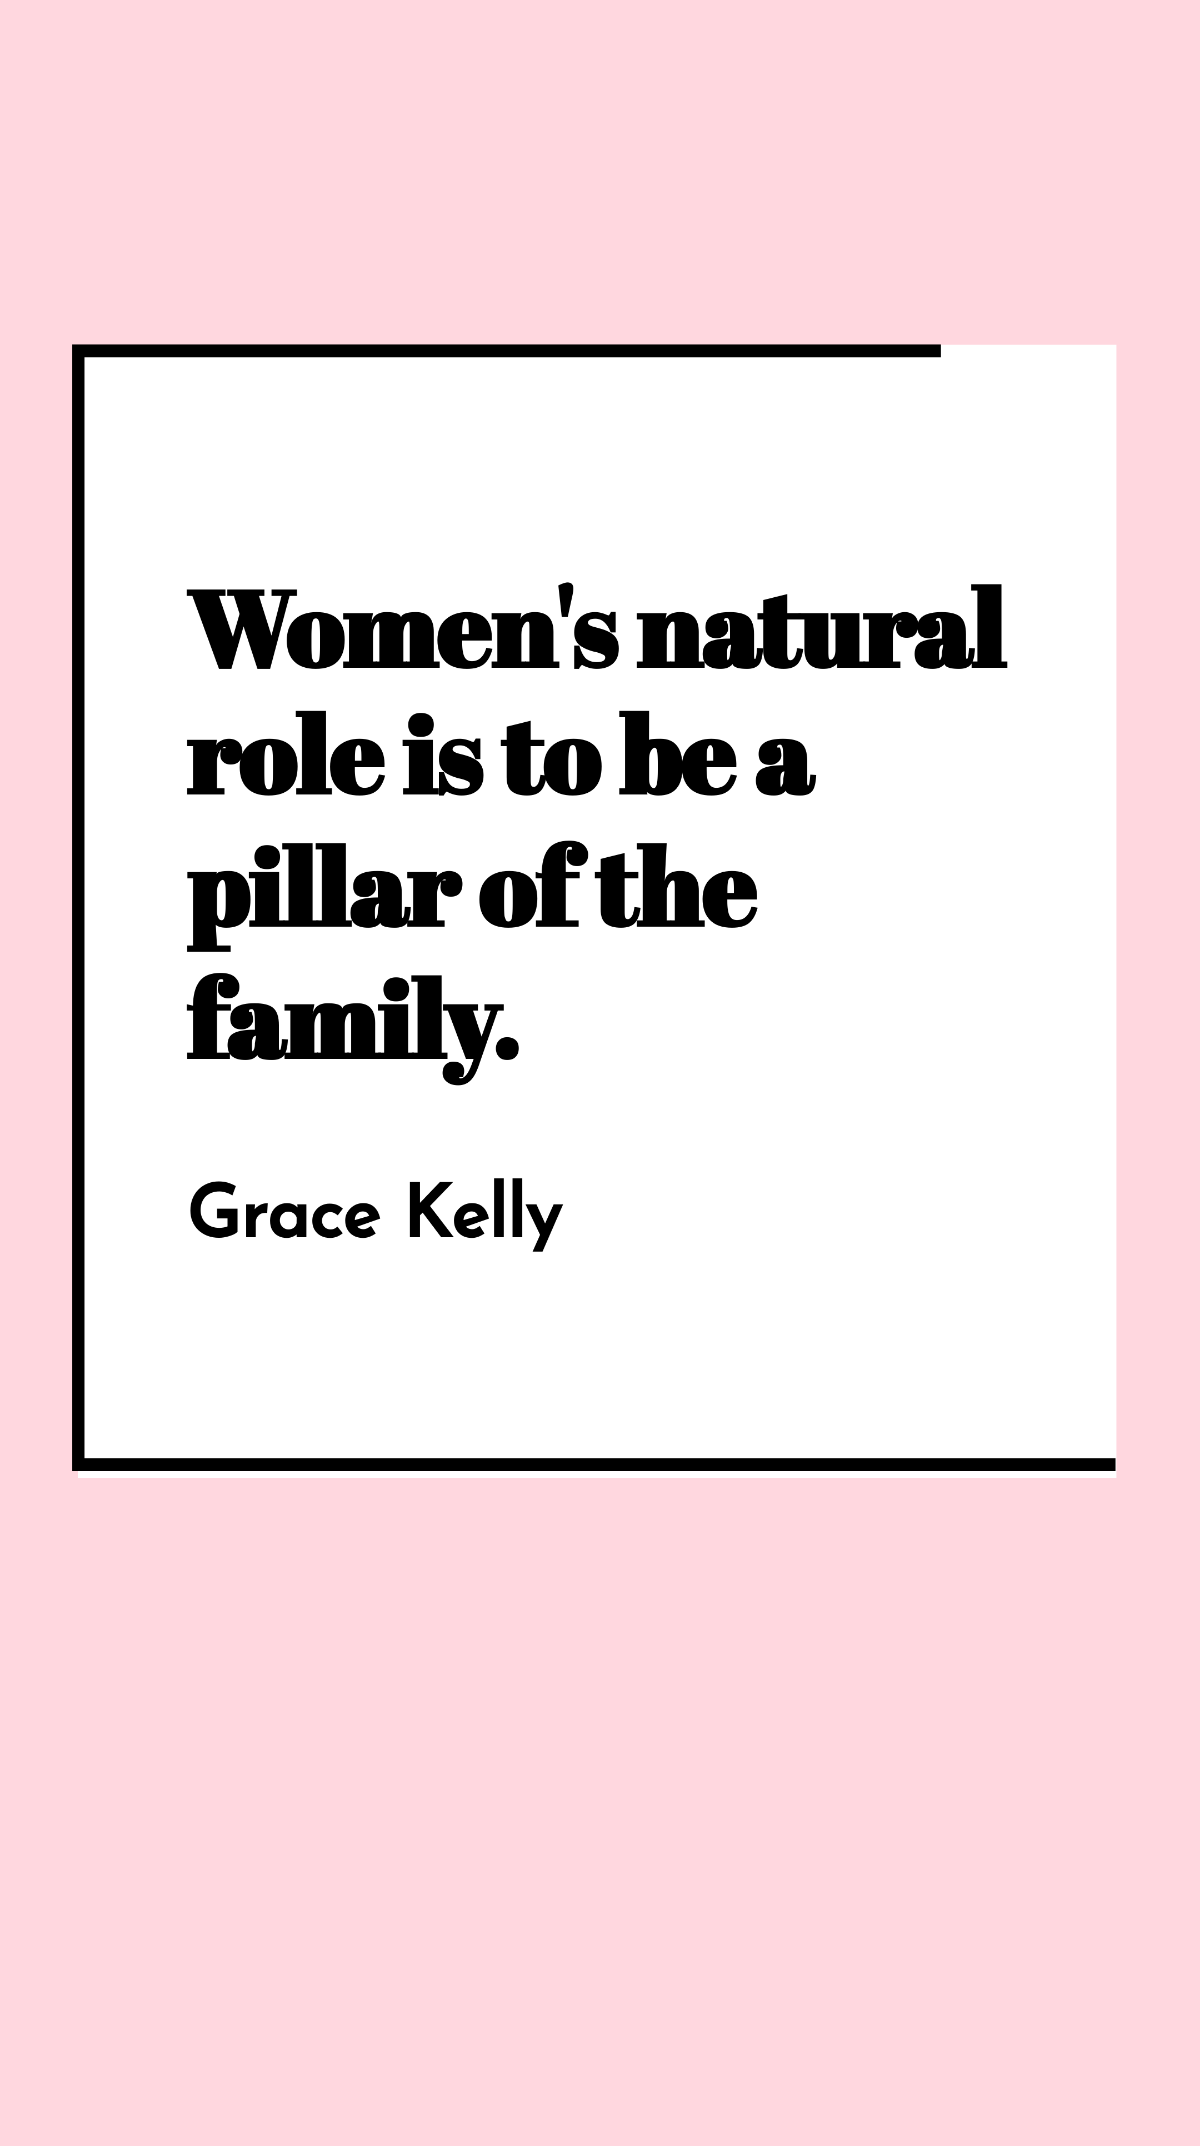 Grace Kelly - Women's natural role is to be a pillar of the family. Template